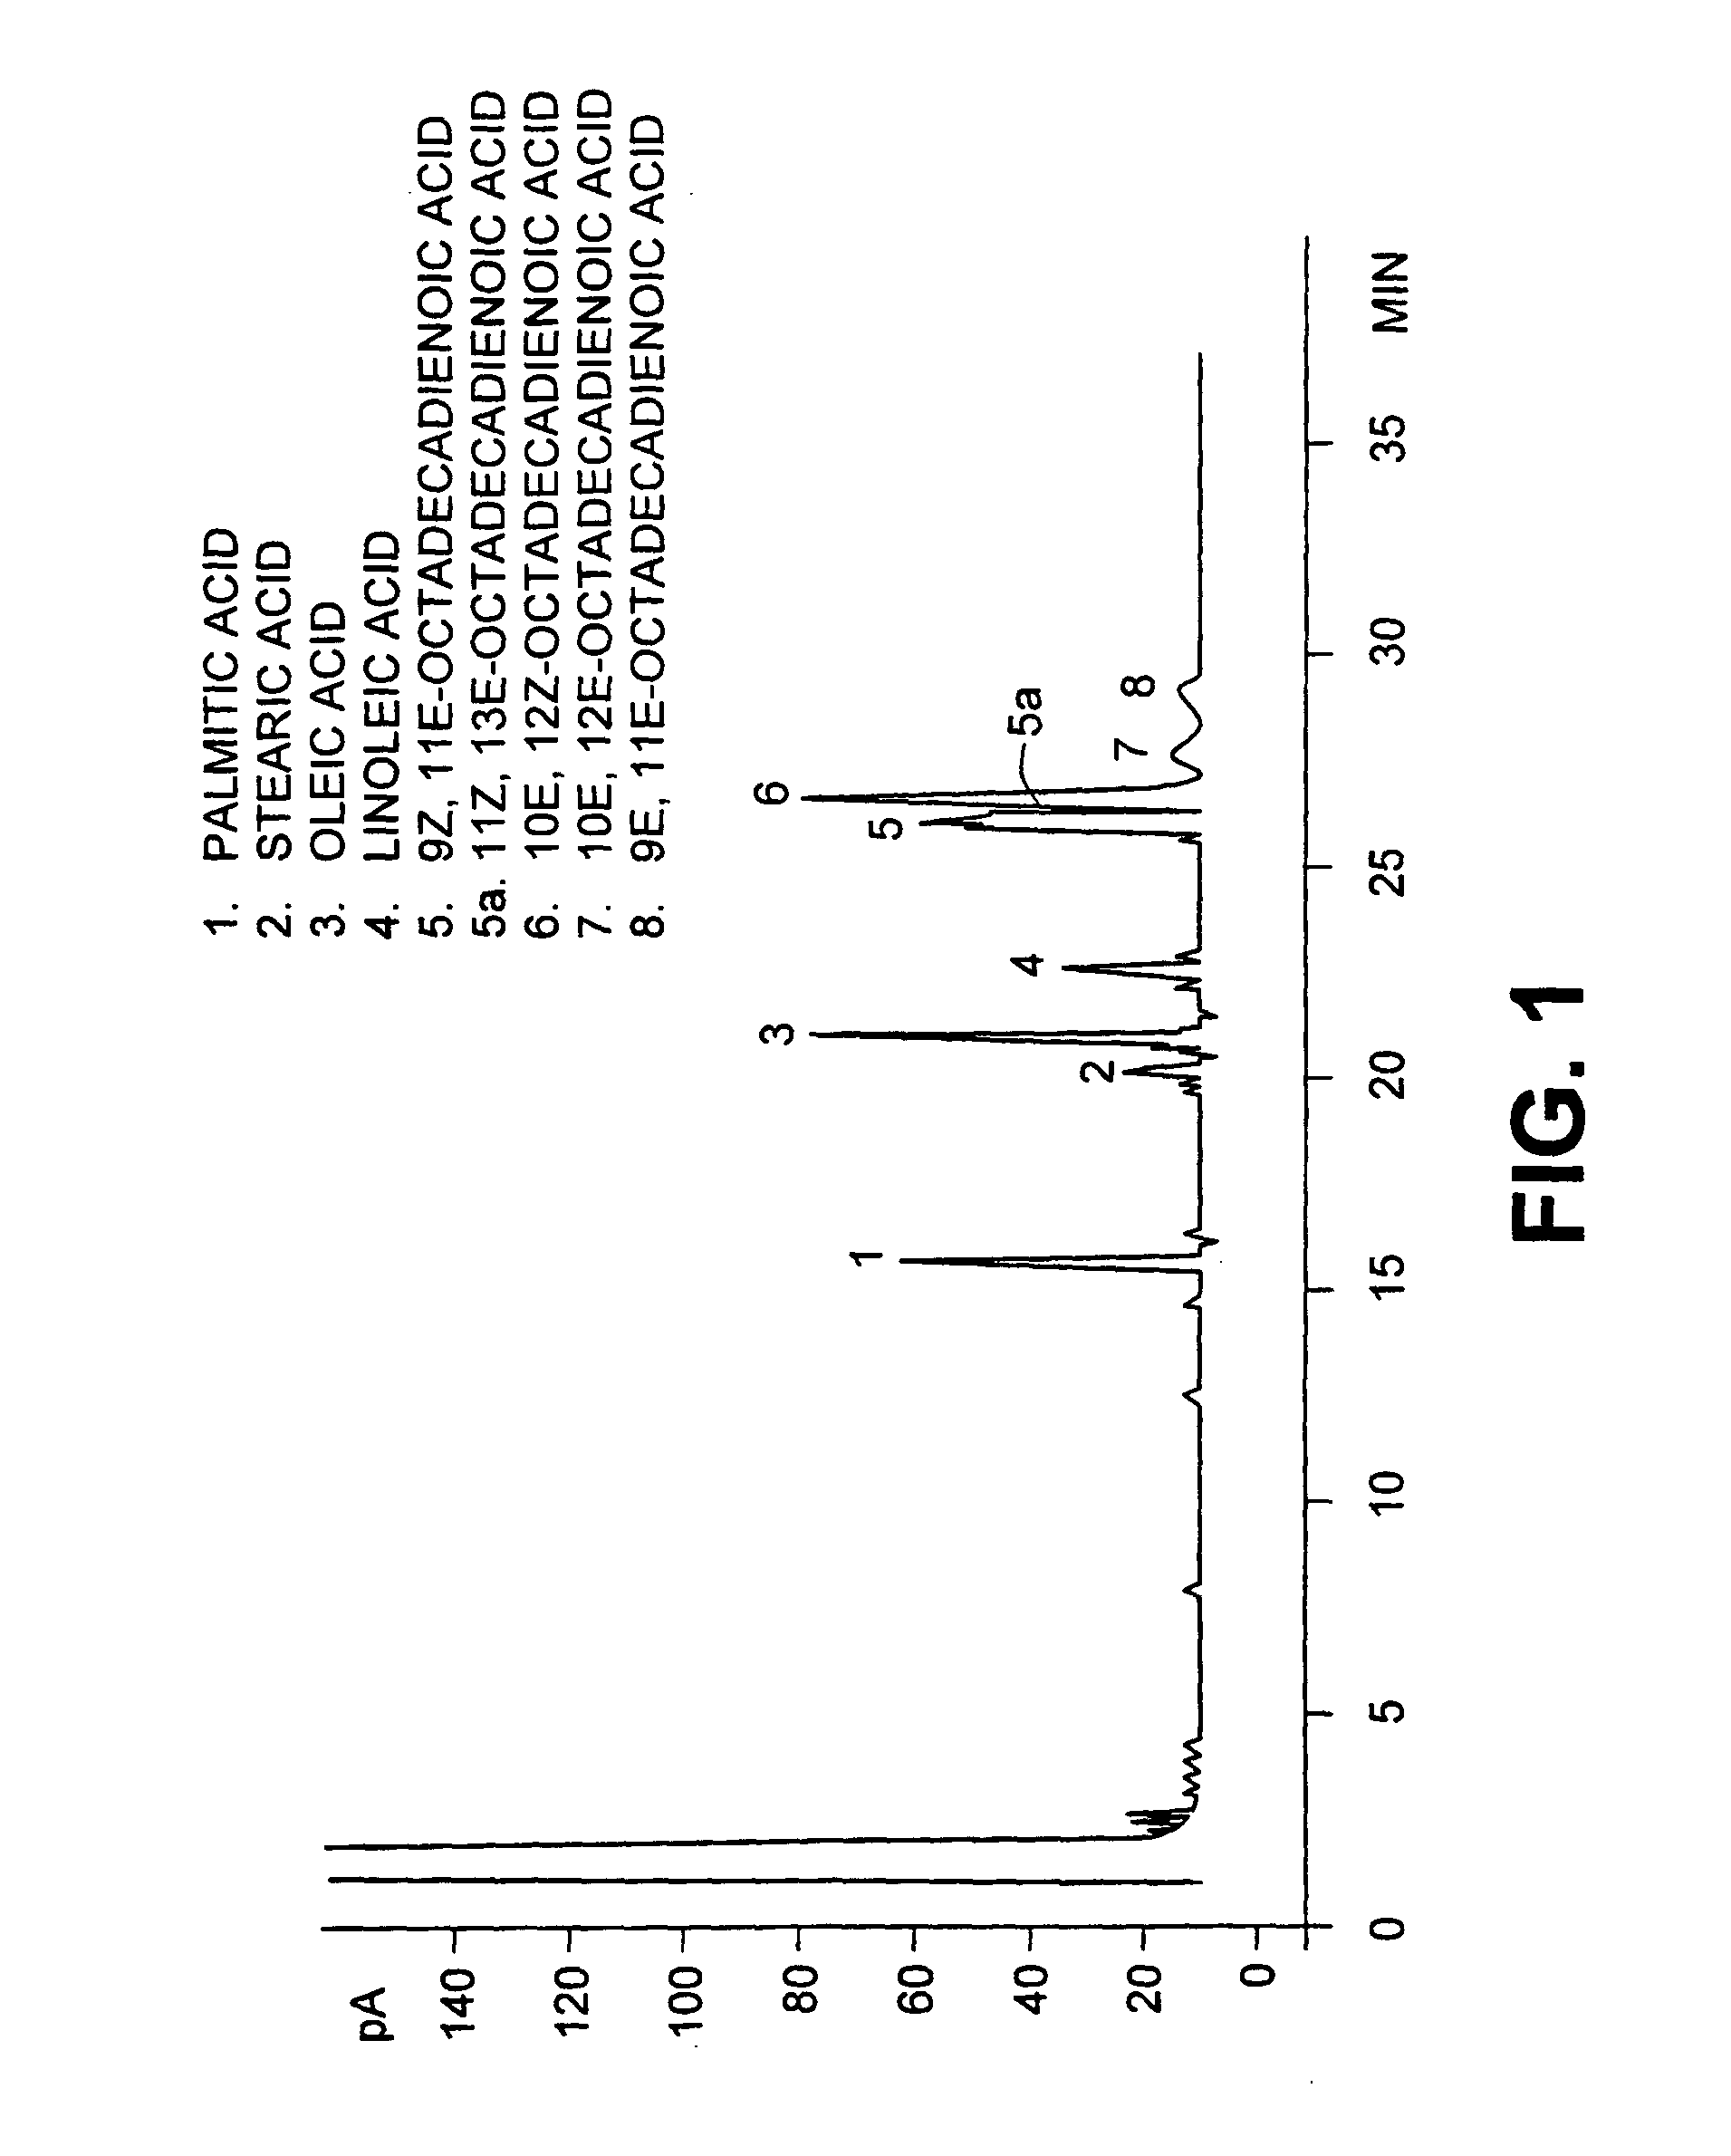 Method for commercial preparation of preffered isomeric forms of ester free conjugated fatty acids with solvents systems containing polyether alcohol solvents